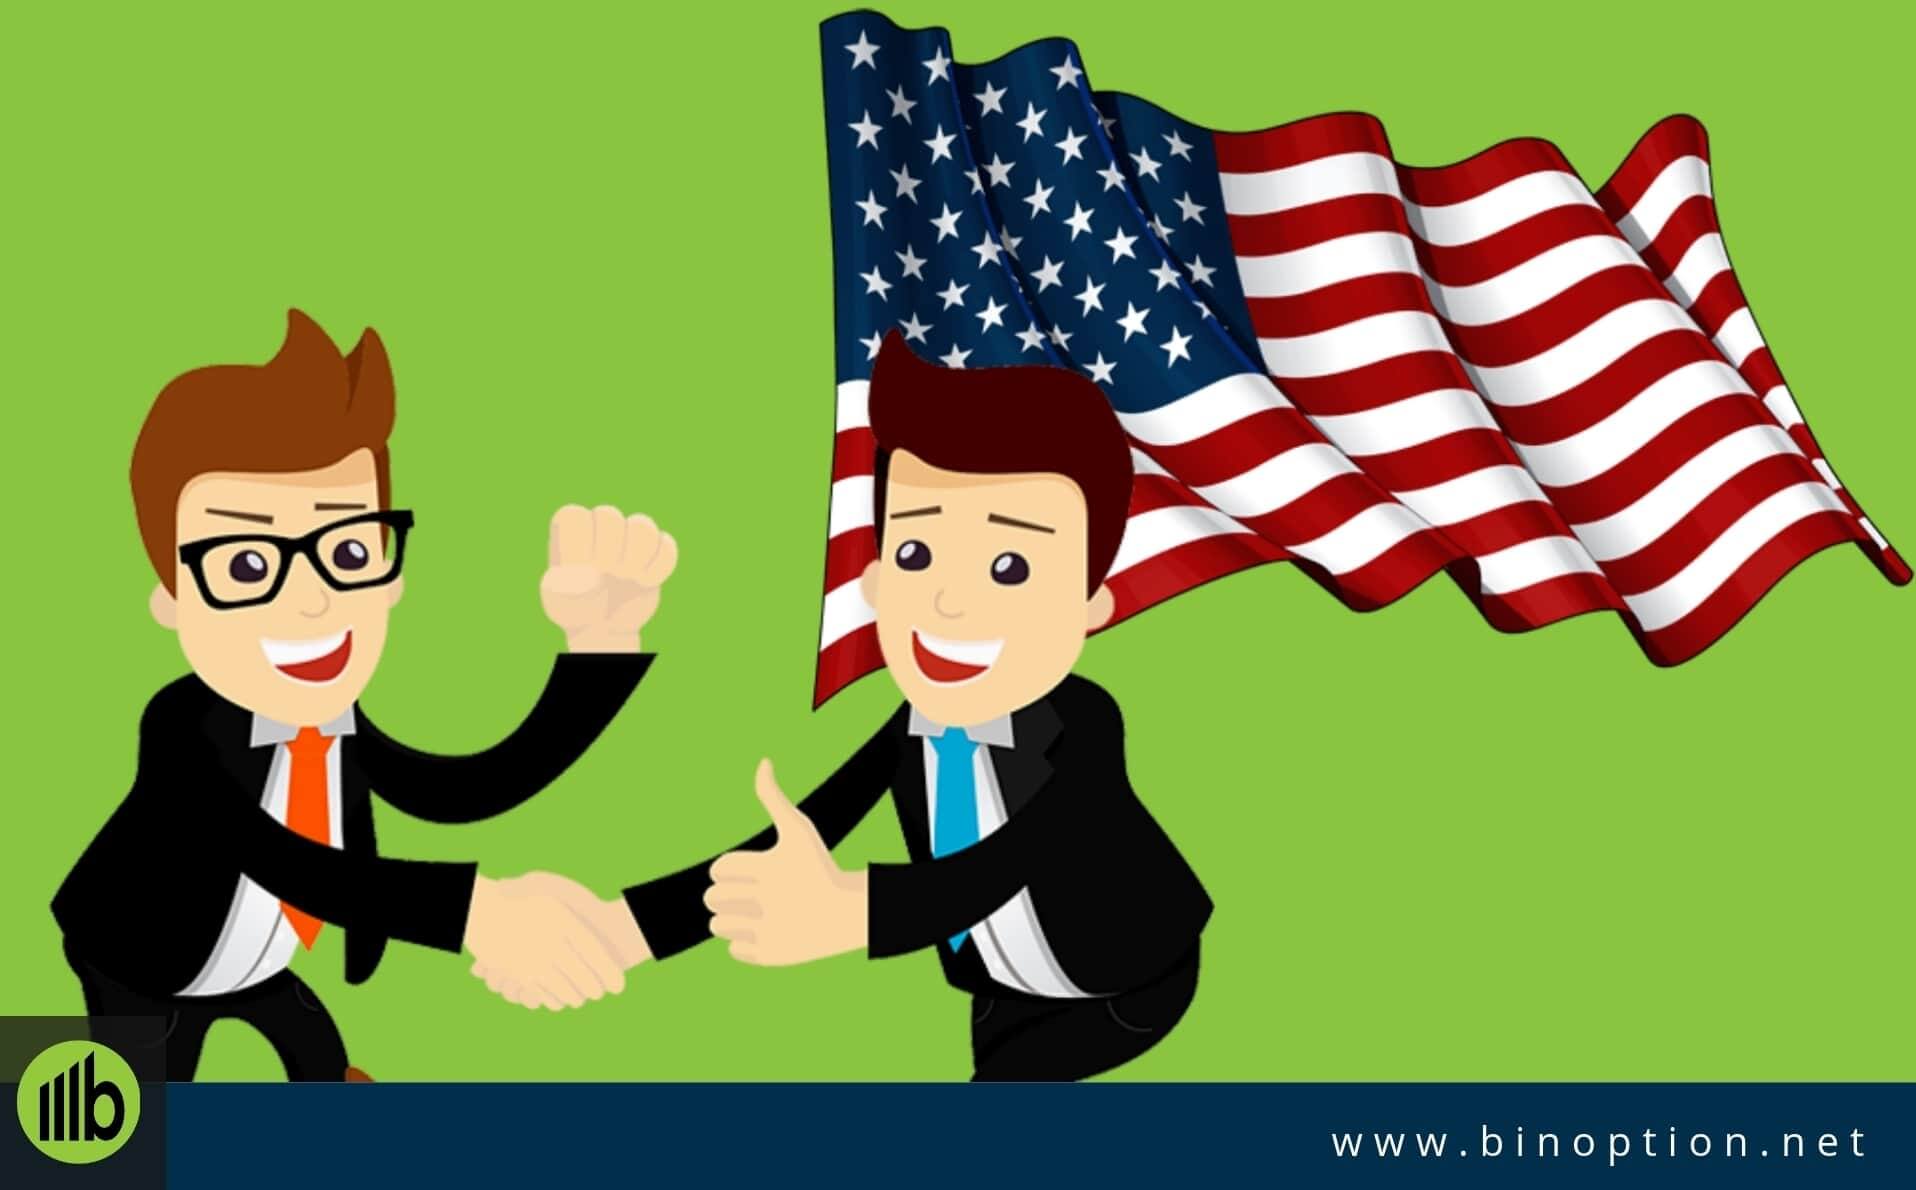 Binary options brokers regulated by cftc